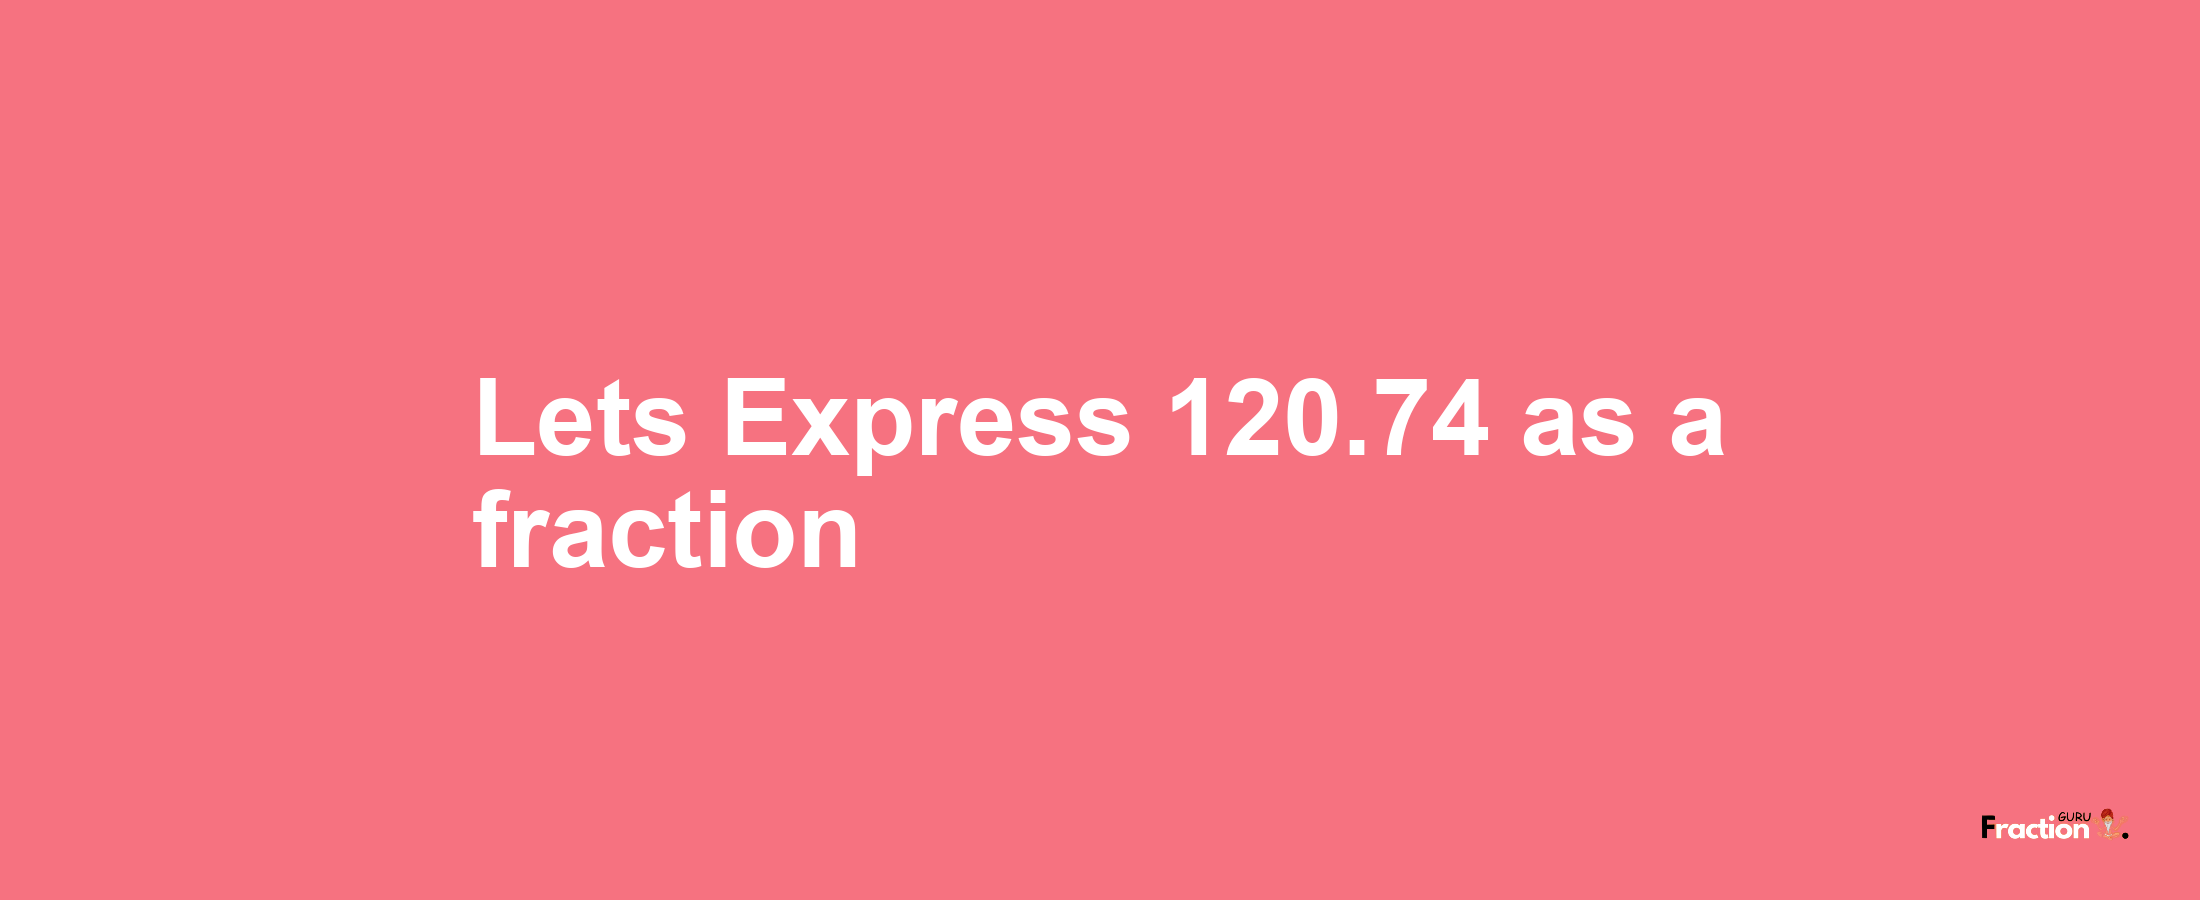 Lets Express 120.74 as afraction